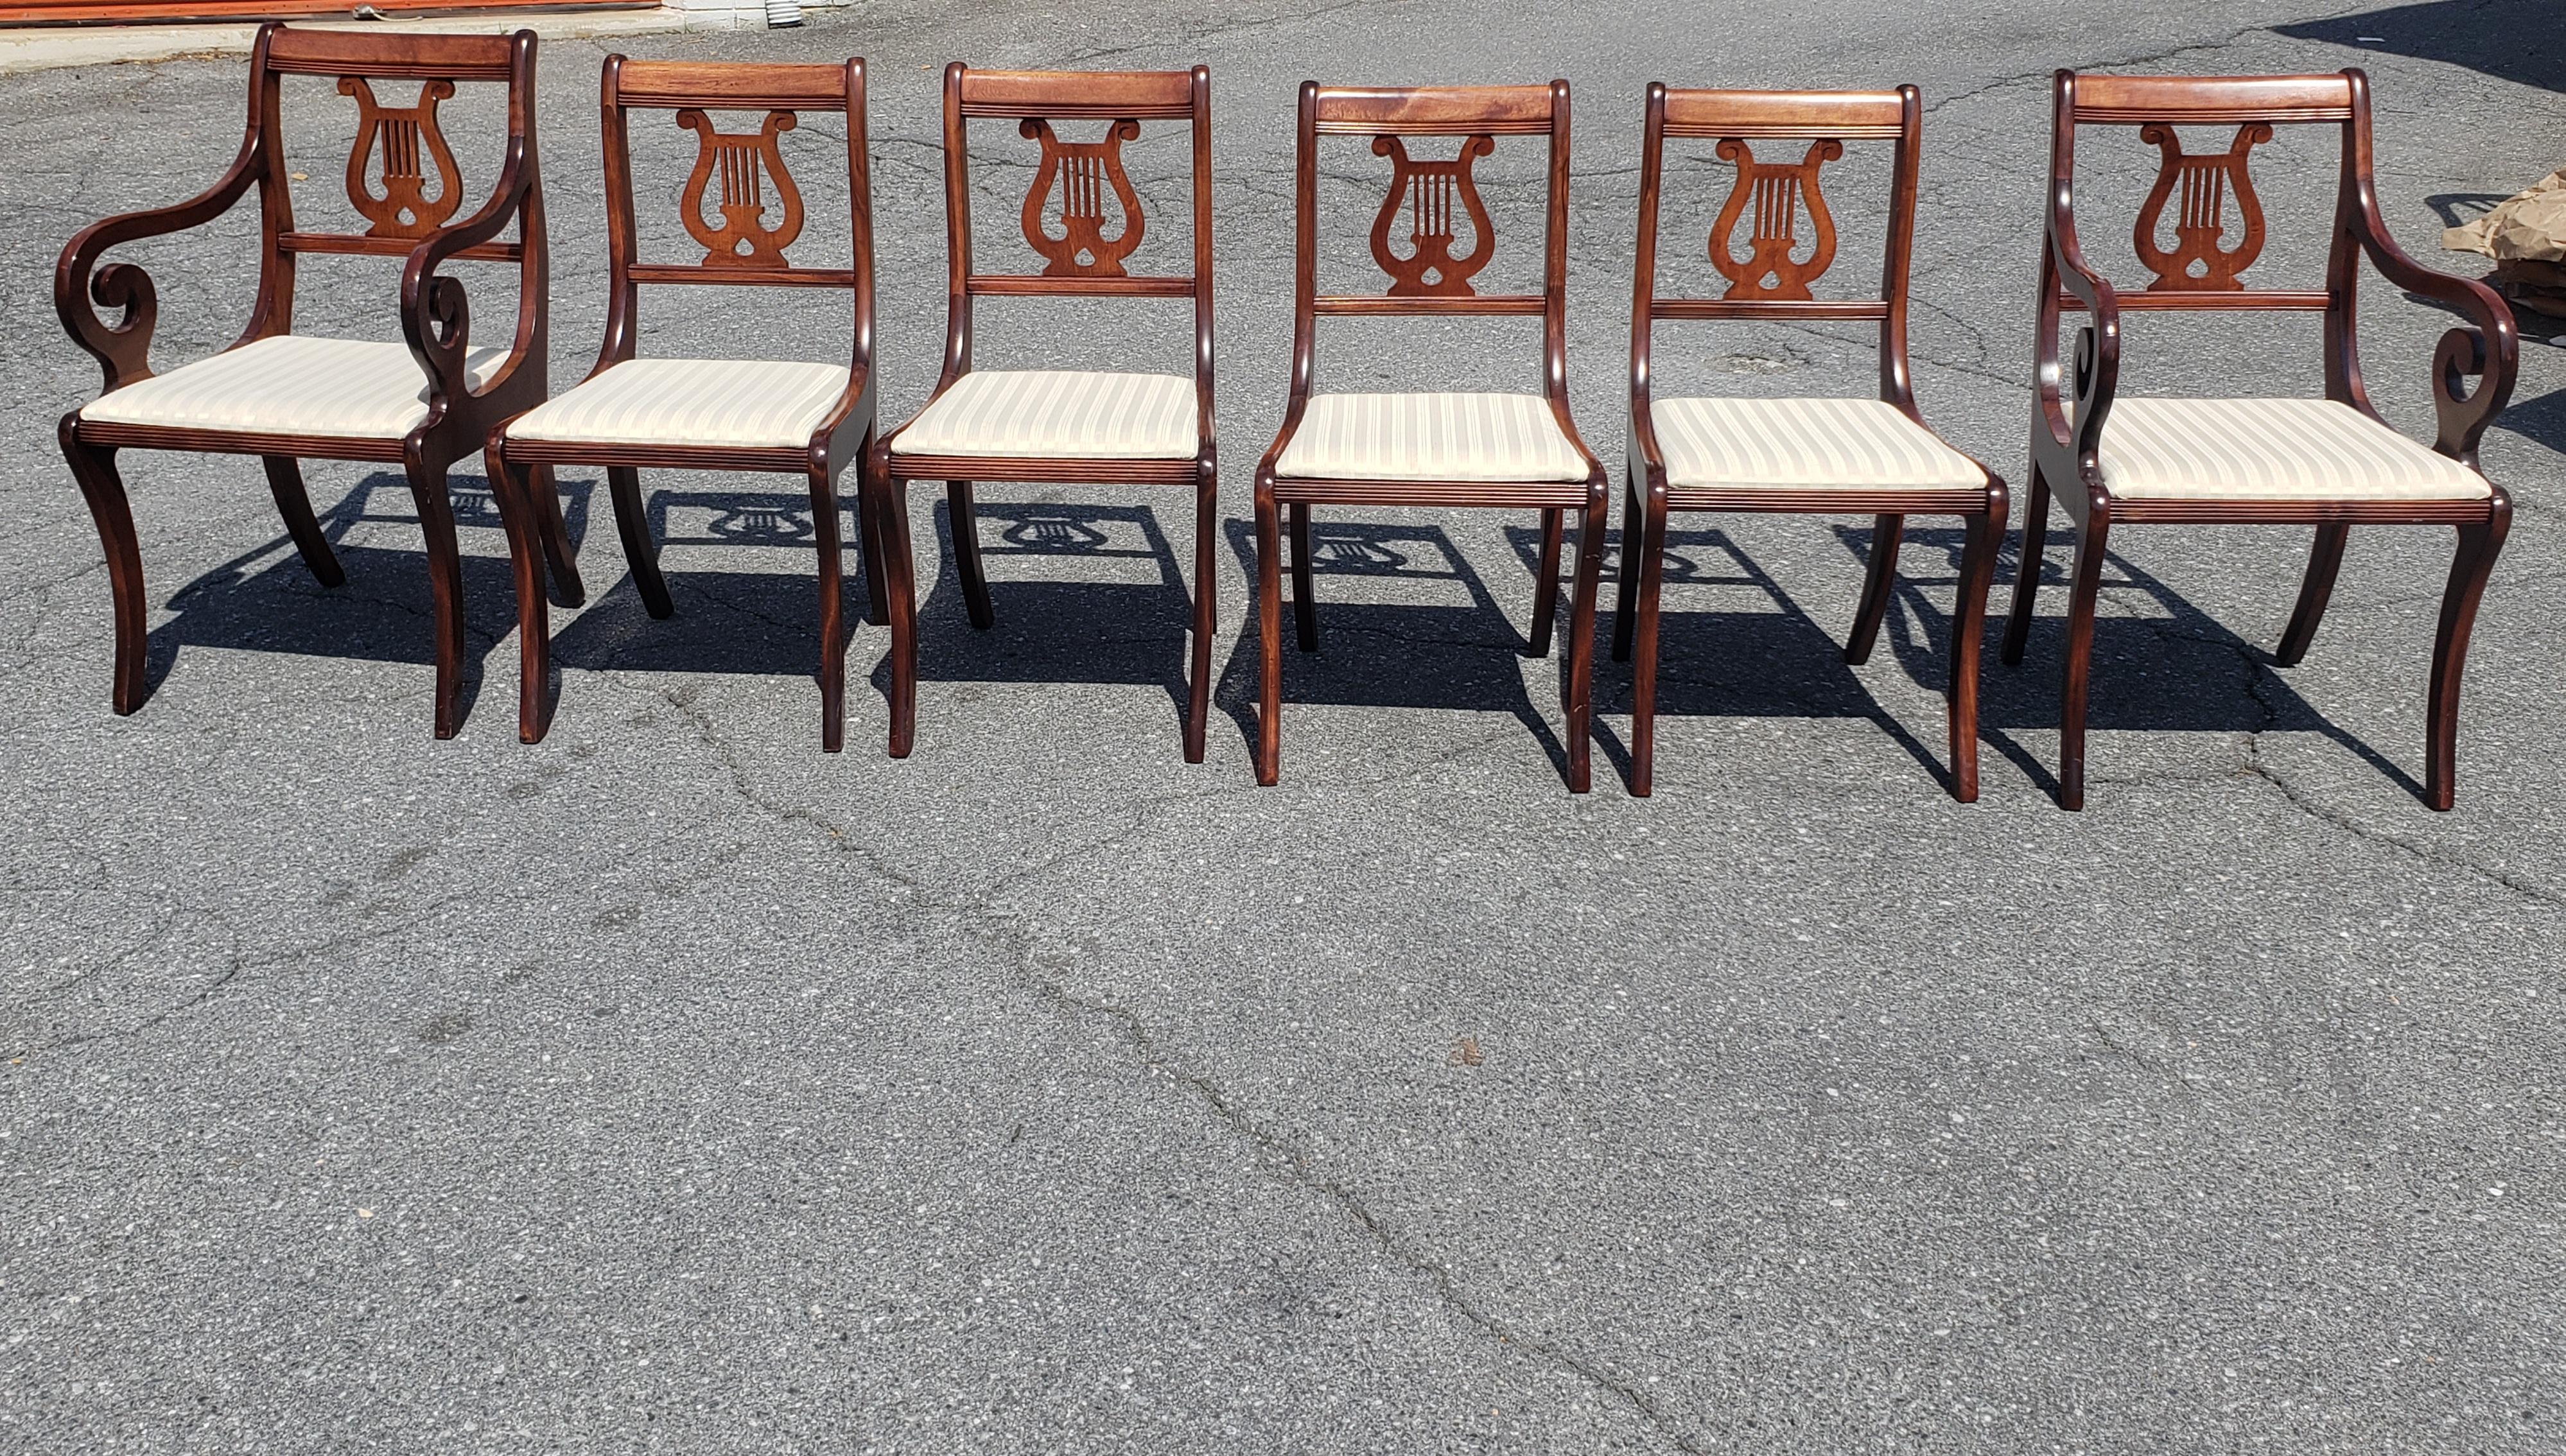 1940s Set of 6 Refinished Mahogany Klismos Lyre Back dining Chairs with 4 side chairs and two scroll arms captain chairs.
Cream color upholstered seats.